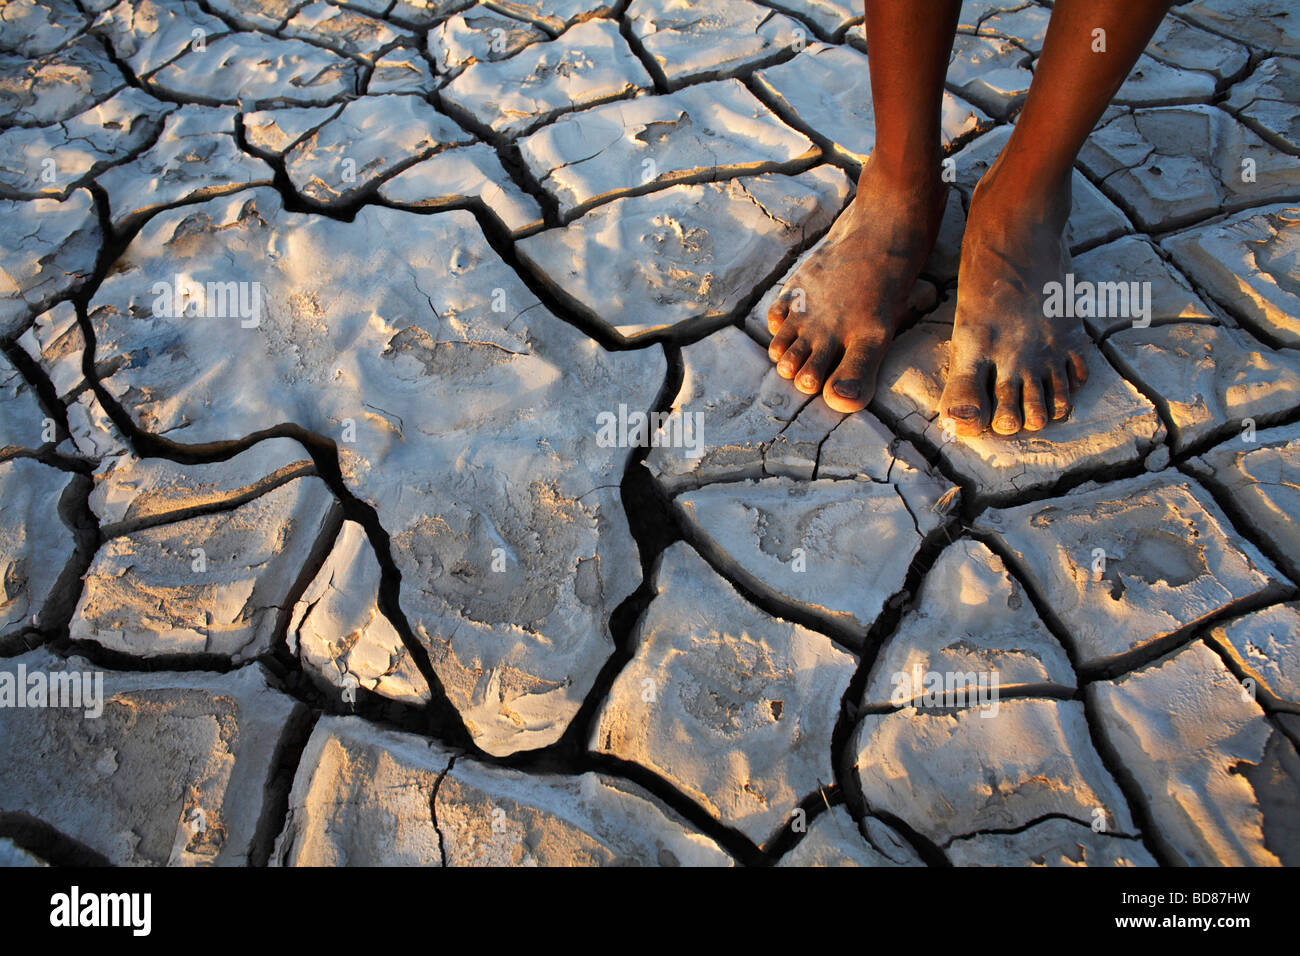 Africa seen in the cracked earth Stock Photo